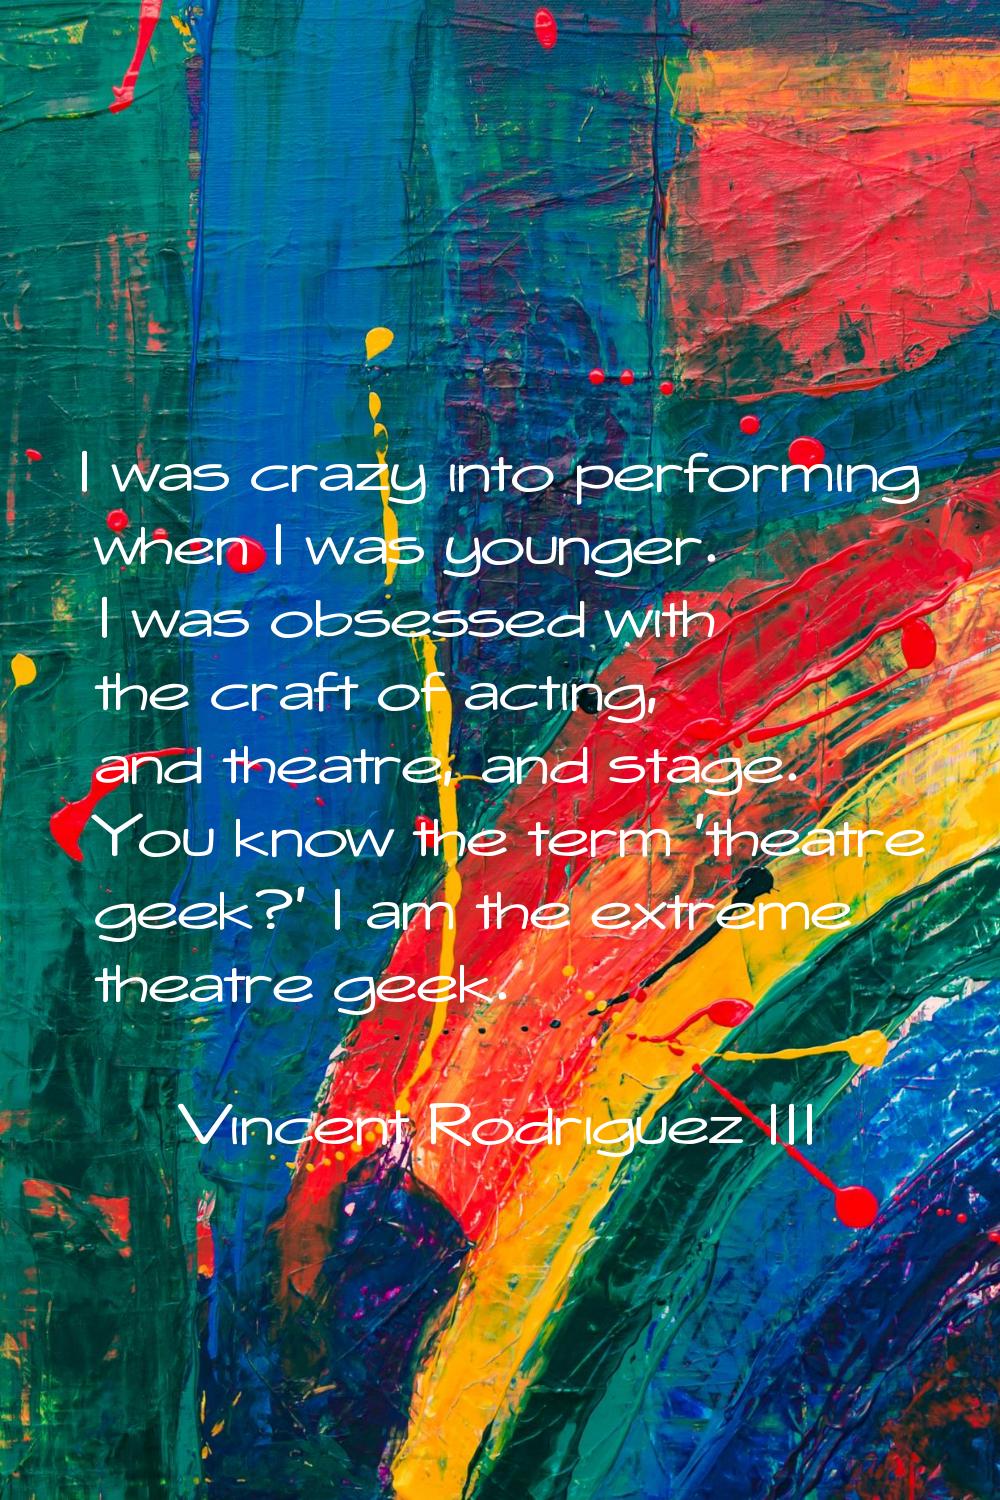 I was crazy into performing when I was younger. I was obsessed with the craft of acting, and theatr